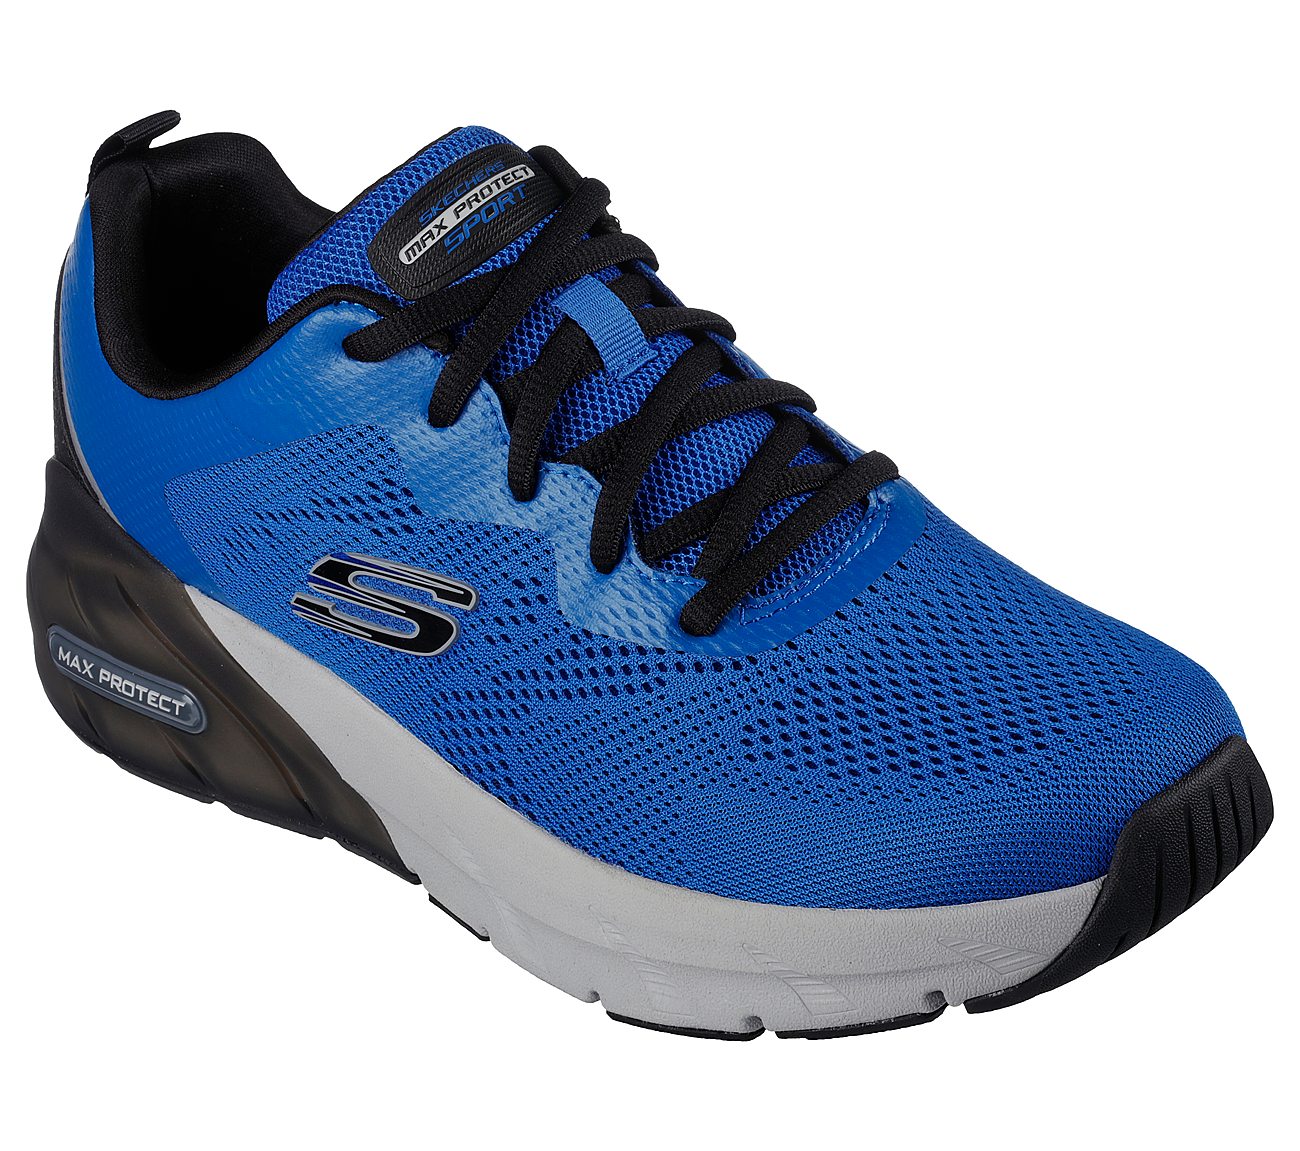 MAX PROTECT SPORT - SAFEGUARD, BLUE/BLACK Footwear Top View